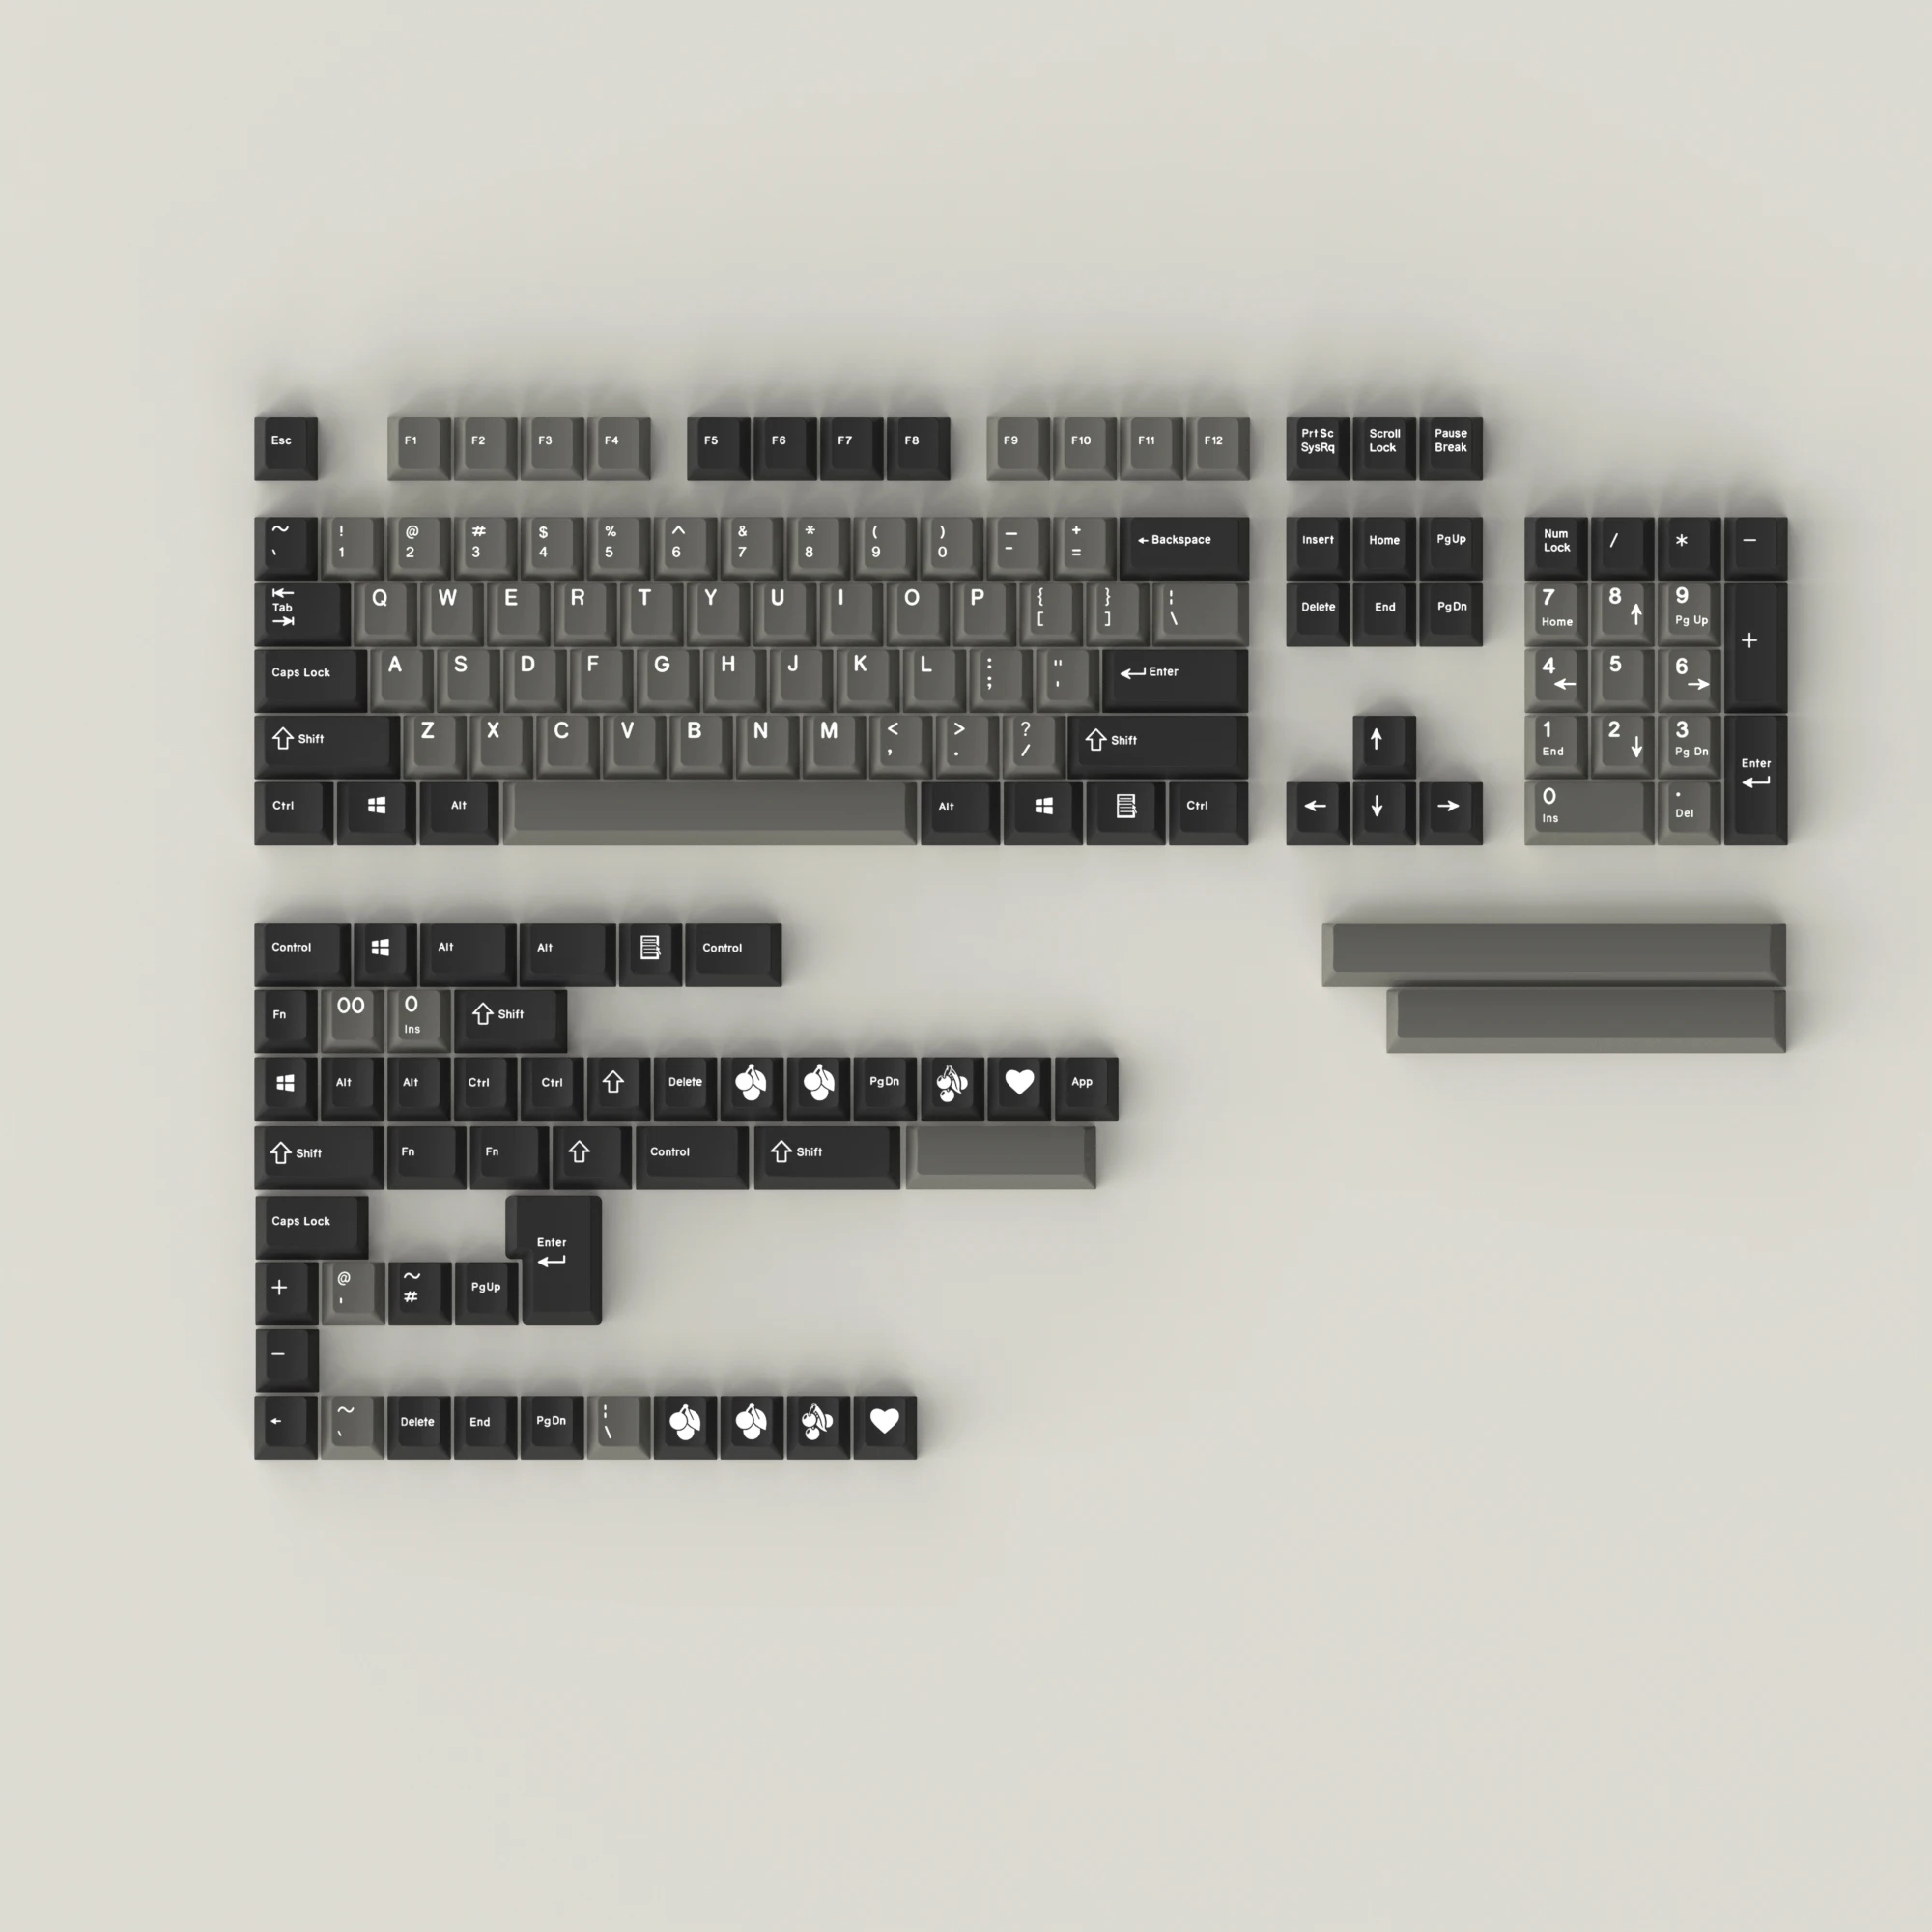 Enjoypbt keycap ABS material dolch two-color injection mechanical keyboard available 153 key cherry height